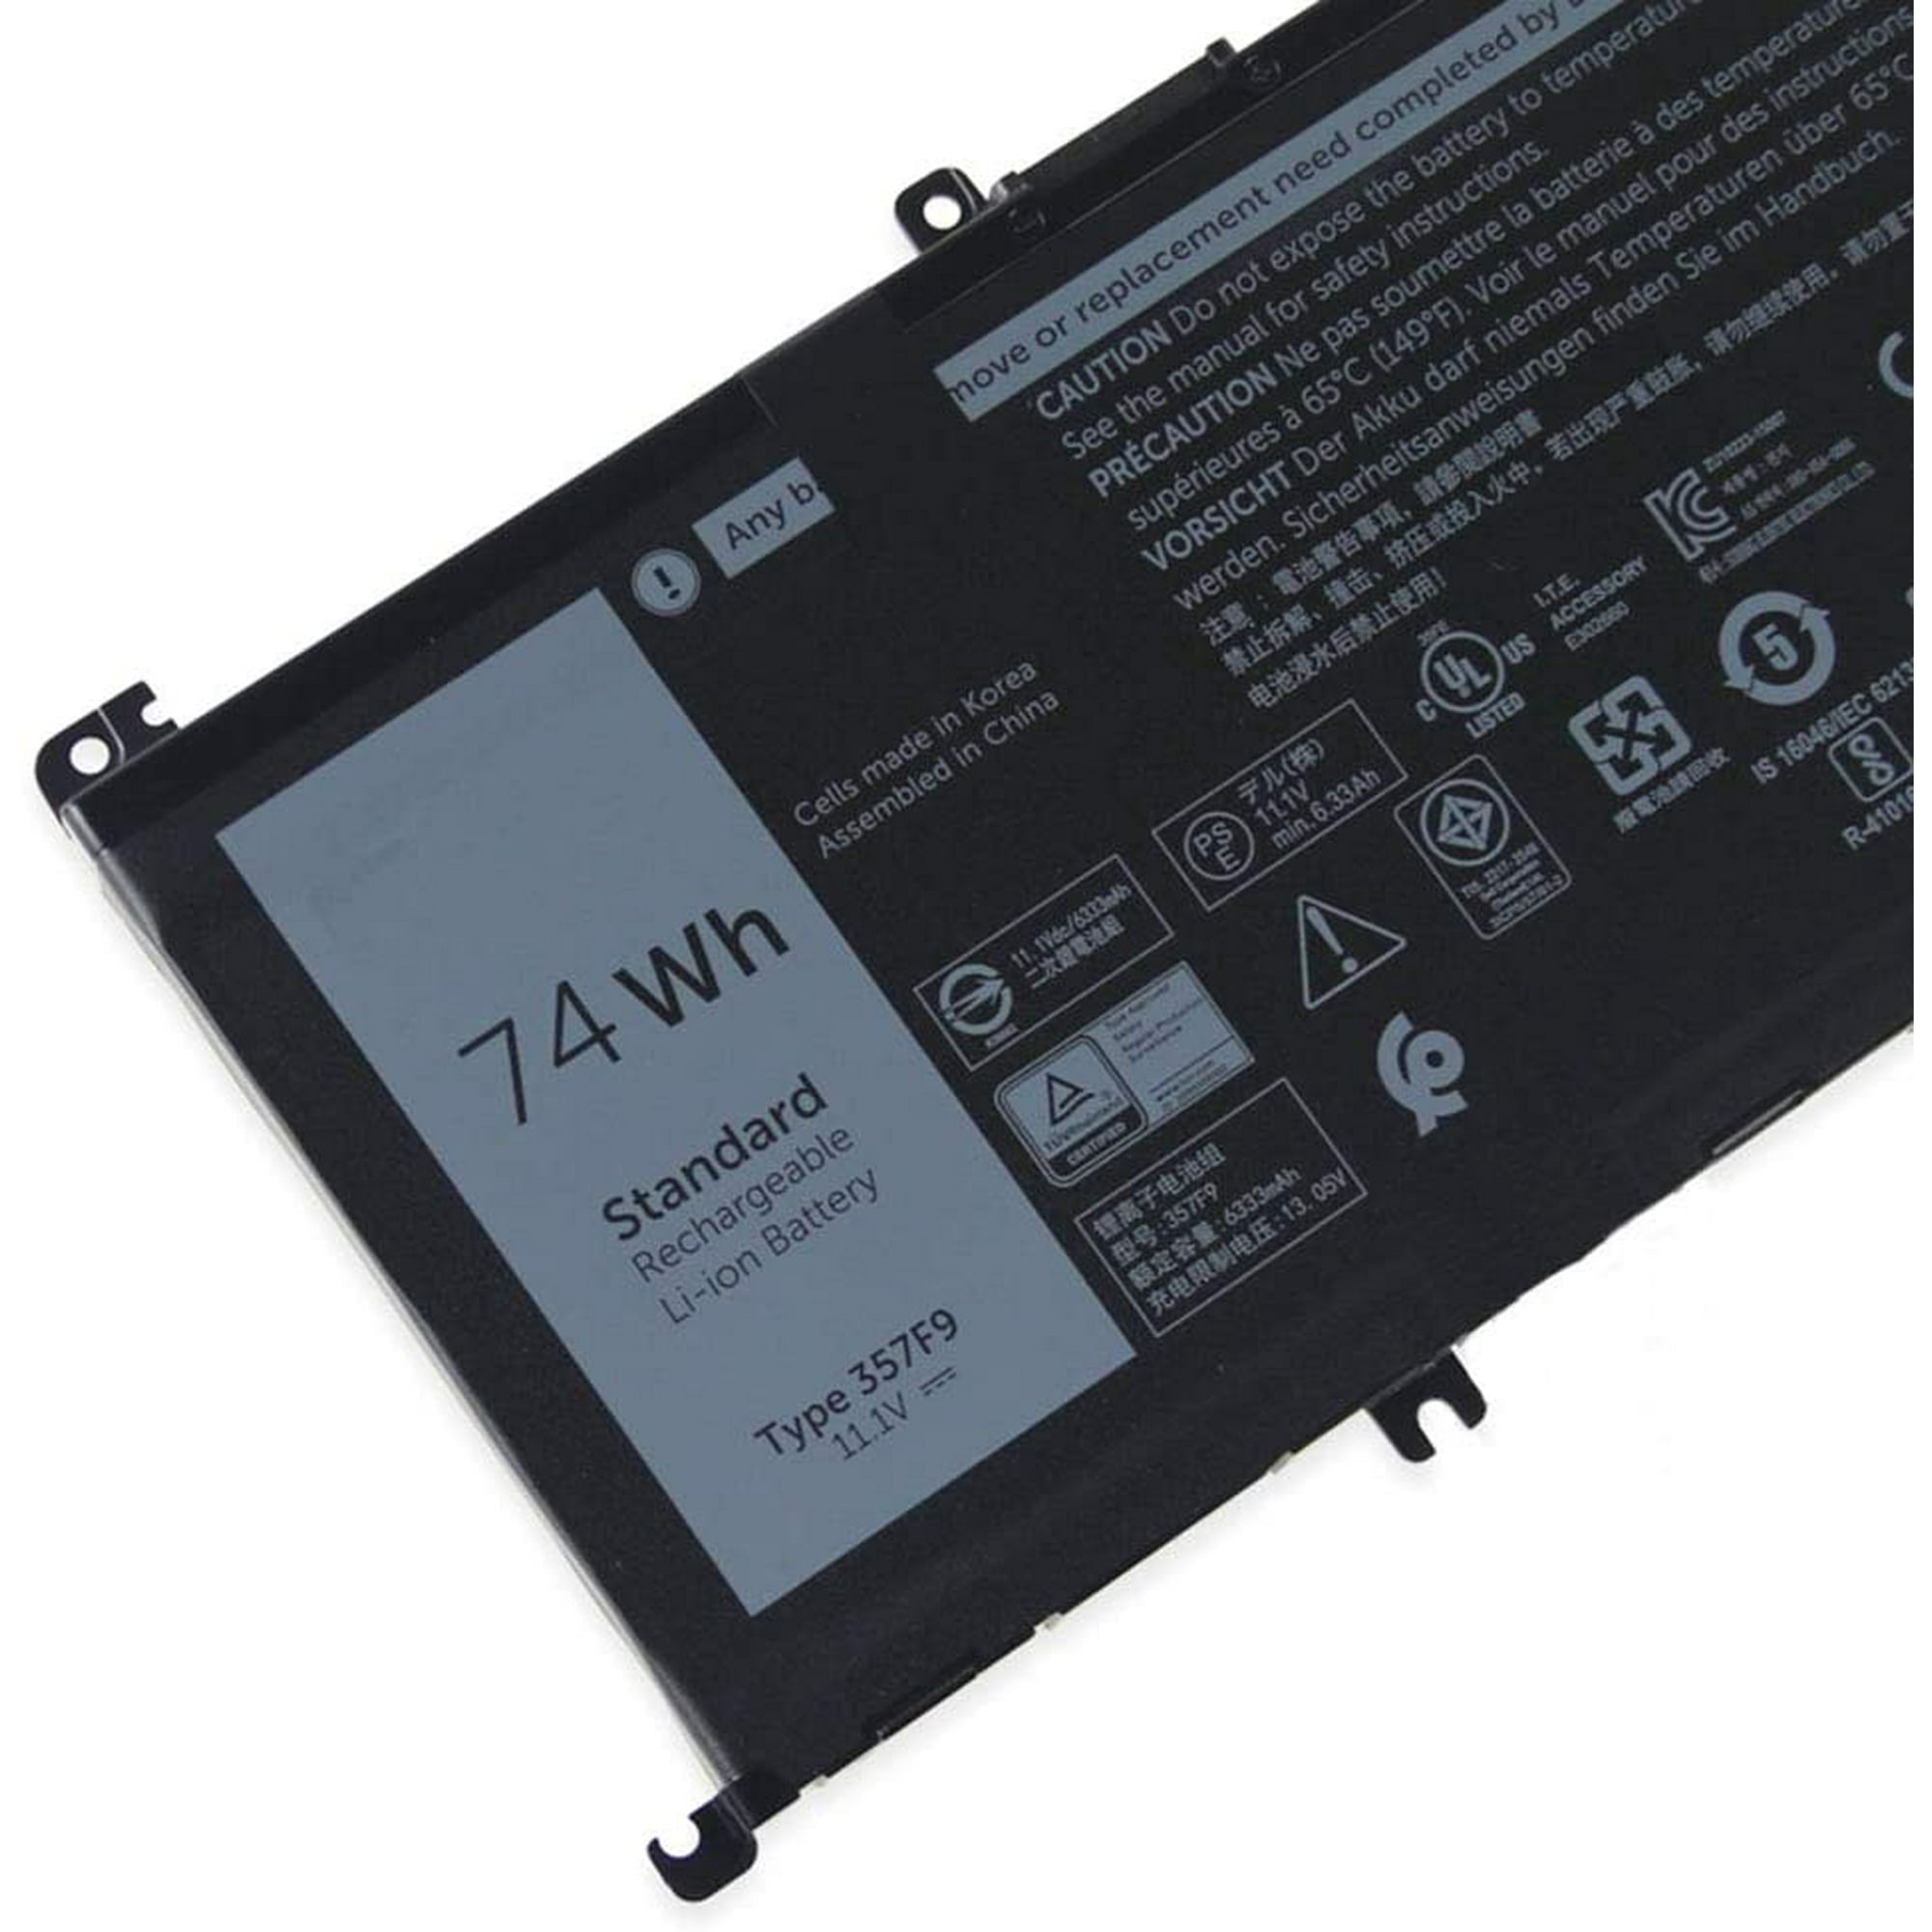 New 74Wh 357F9 Laptop Primary Battery Replacement for Dell Inspiron 15 7000 7566 7567 7557 7559 5576 5577 INS15PD-1548B 1548R 1748B 1748R 2548R 2548B 2748R 0GFJ6 71JF4 Gaming Notebook Battery